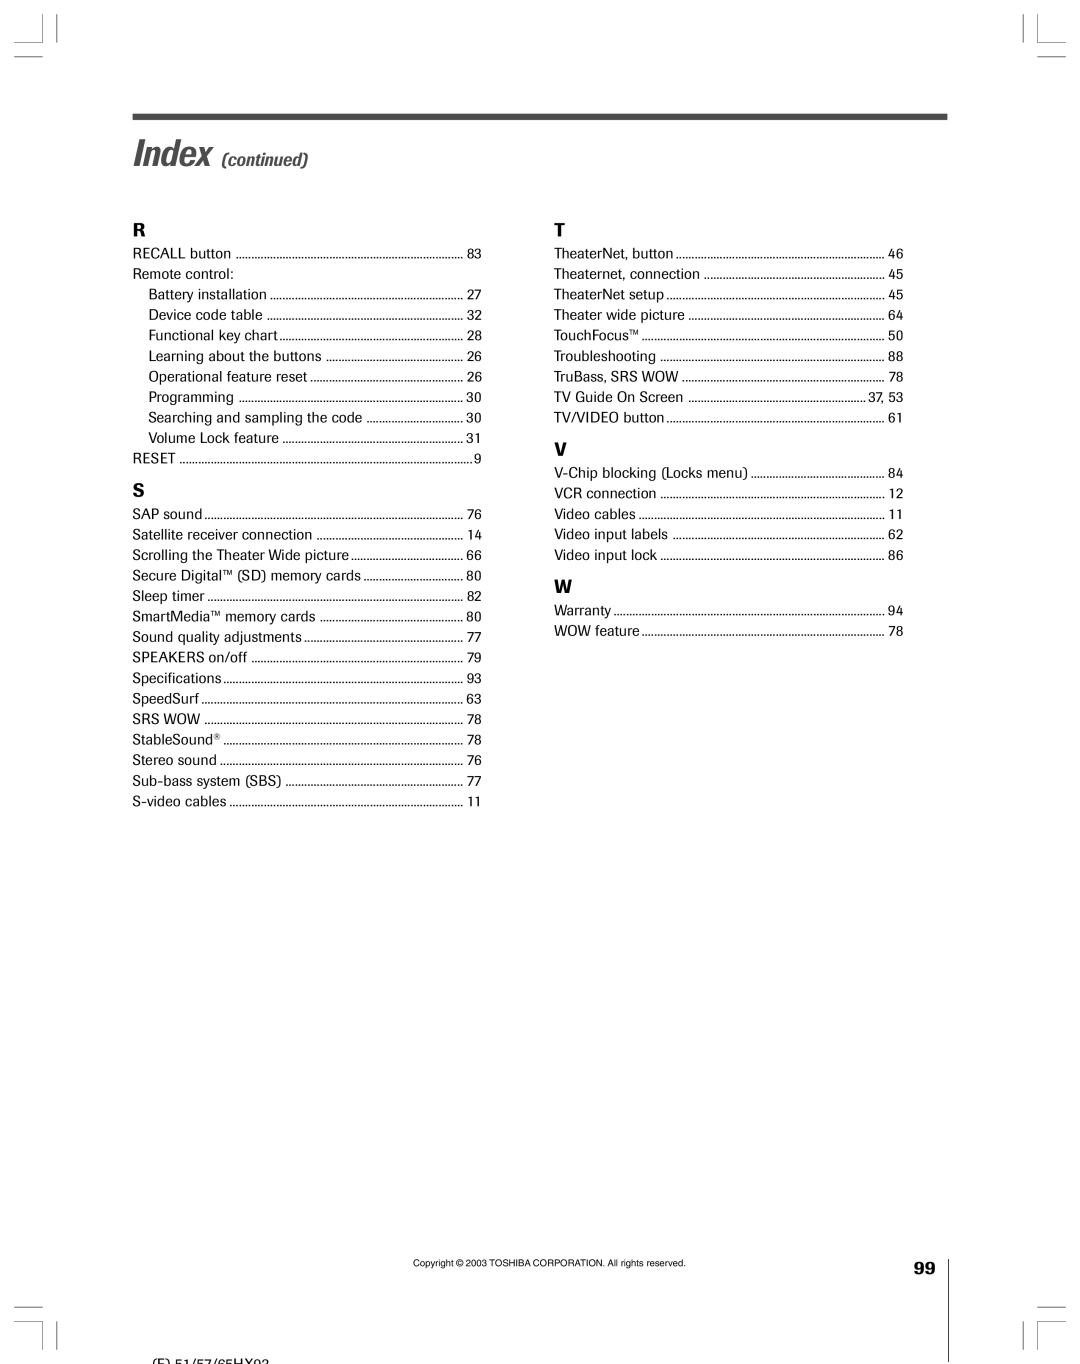 Toshiba 51HX93 owner manual Index continued 